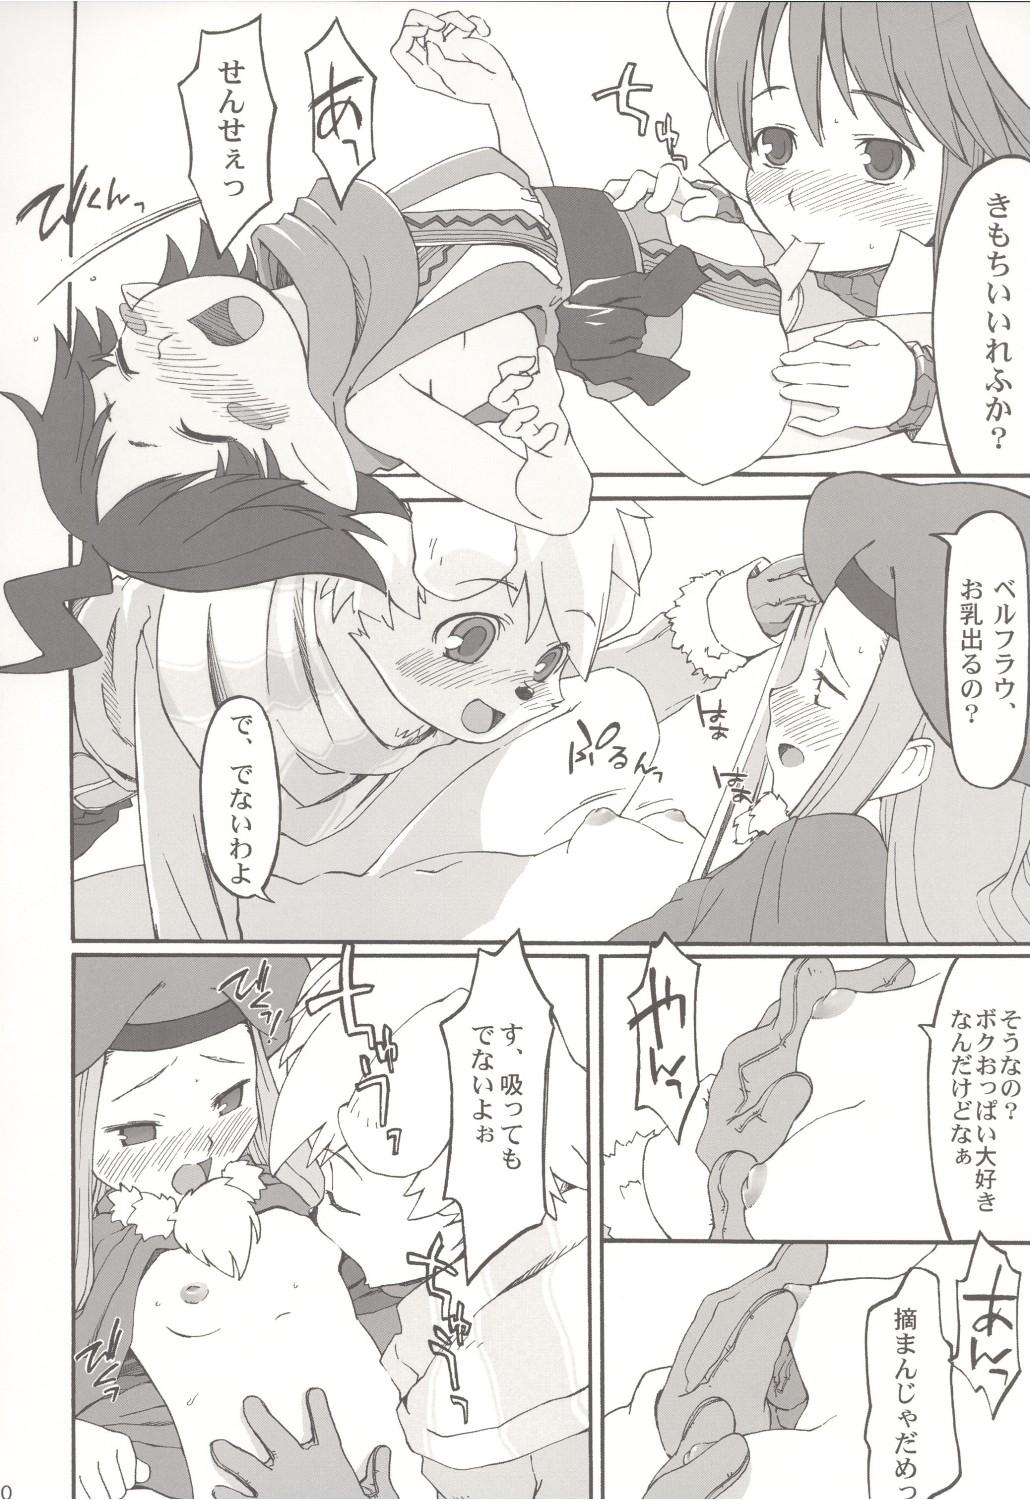 Best Blowjob edelweiss - Summon night Facial - Page 9